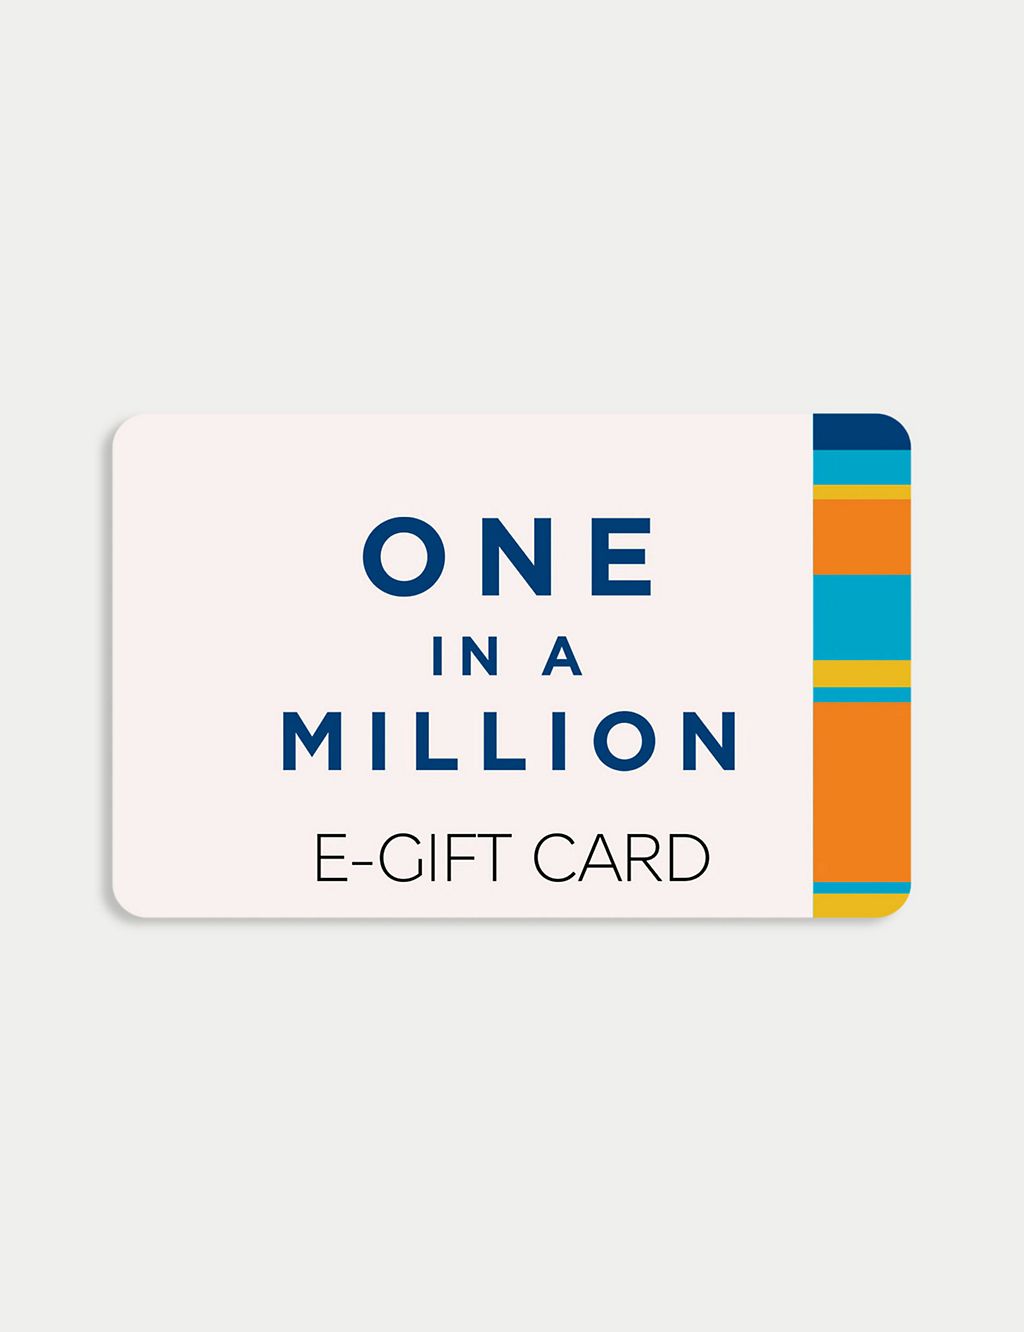 One in a Million E-Gift Card 1 of 1